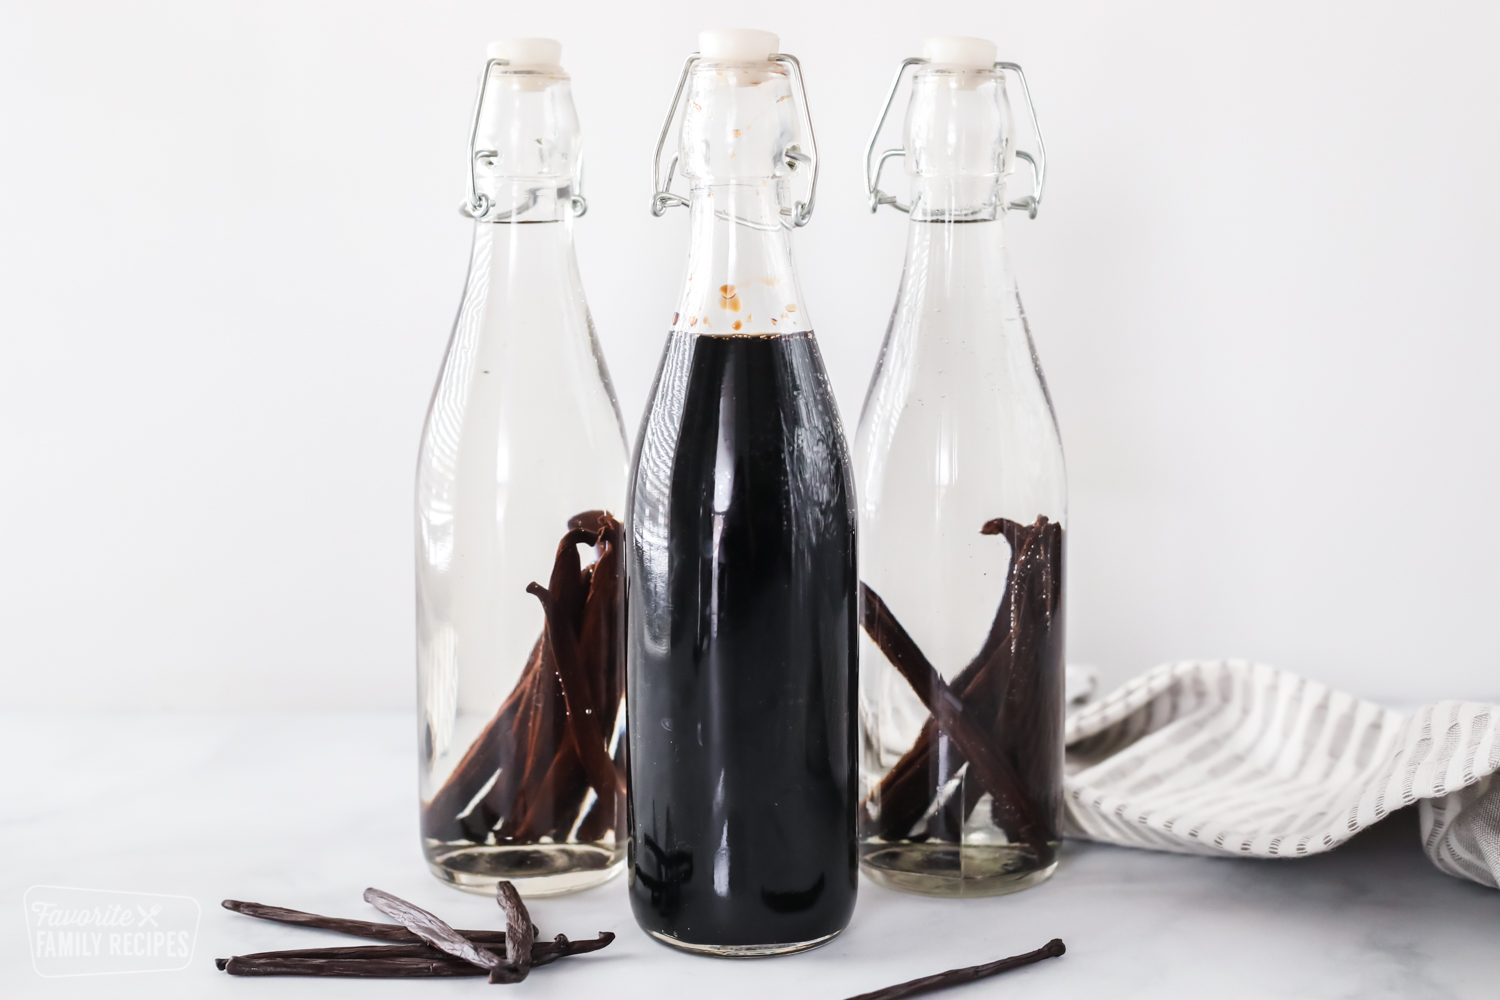 Two bottles of newly made vanilla extract and one bottle of mature vanilla extract with vanilla beans.